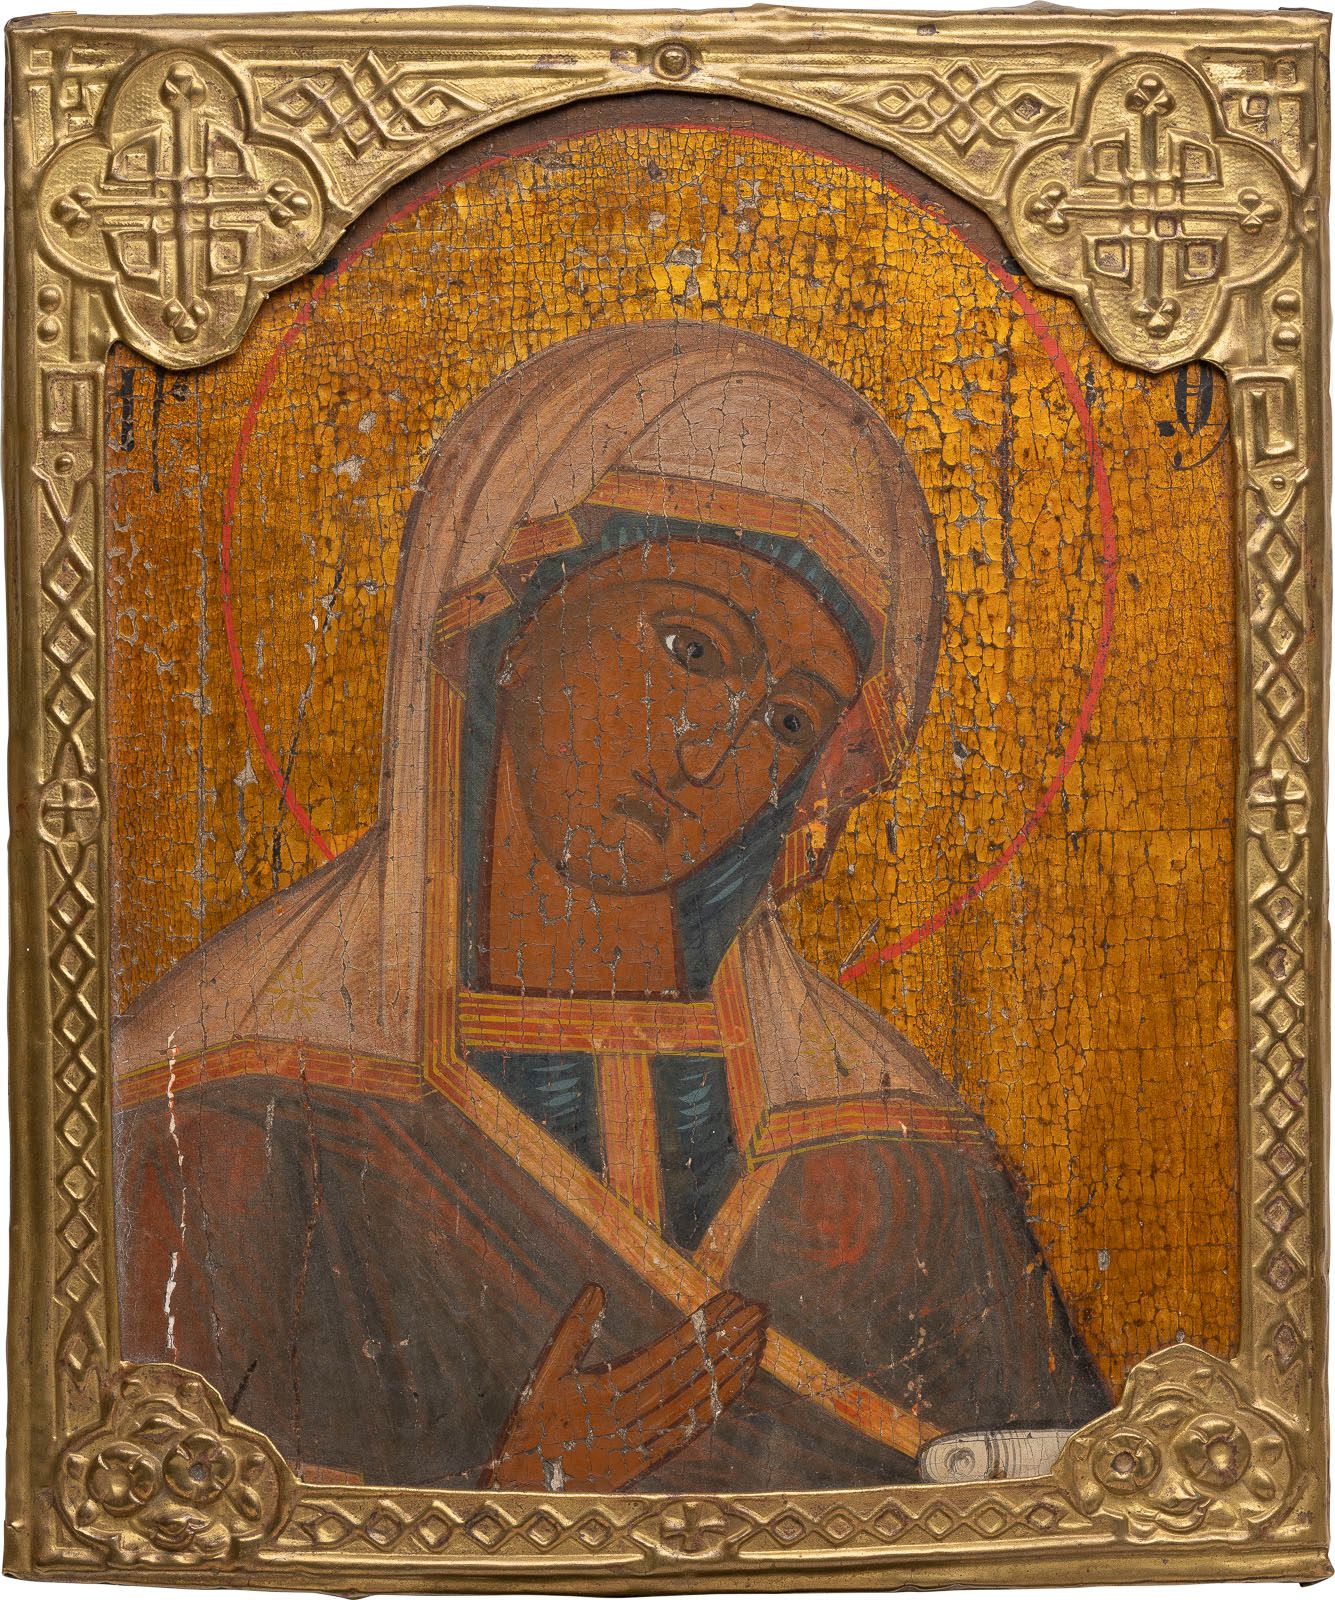 AN ICON SHOWING THE MOTHER OF GOD FROM A DEISIS WITH BASMA ICONA CHE MOSTRA LA M&hellip;